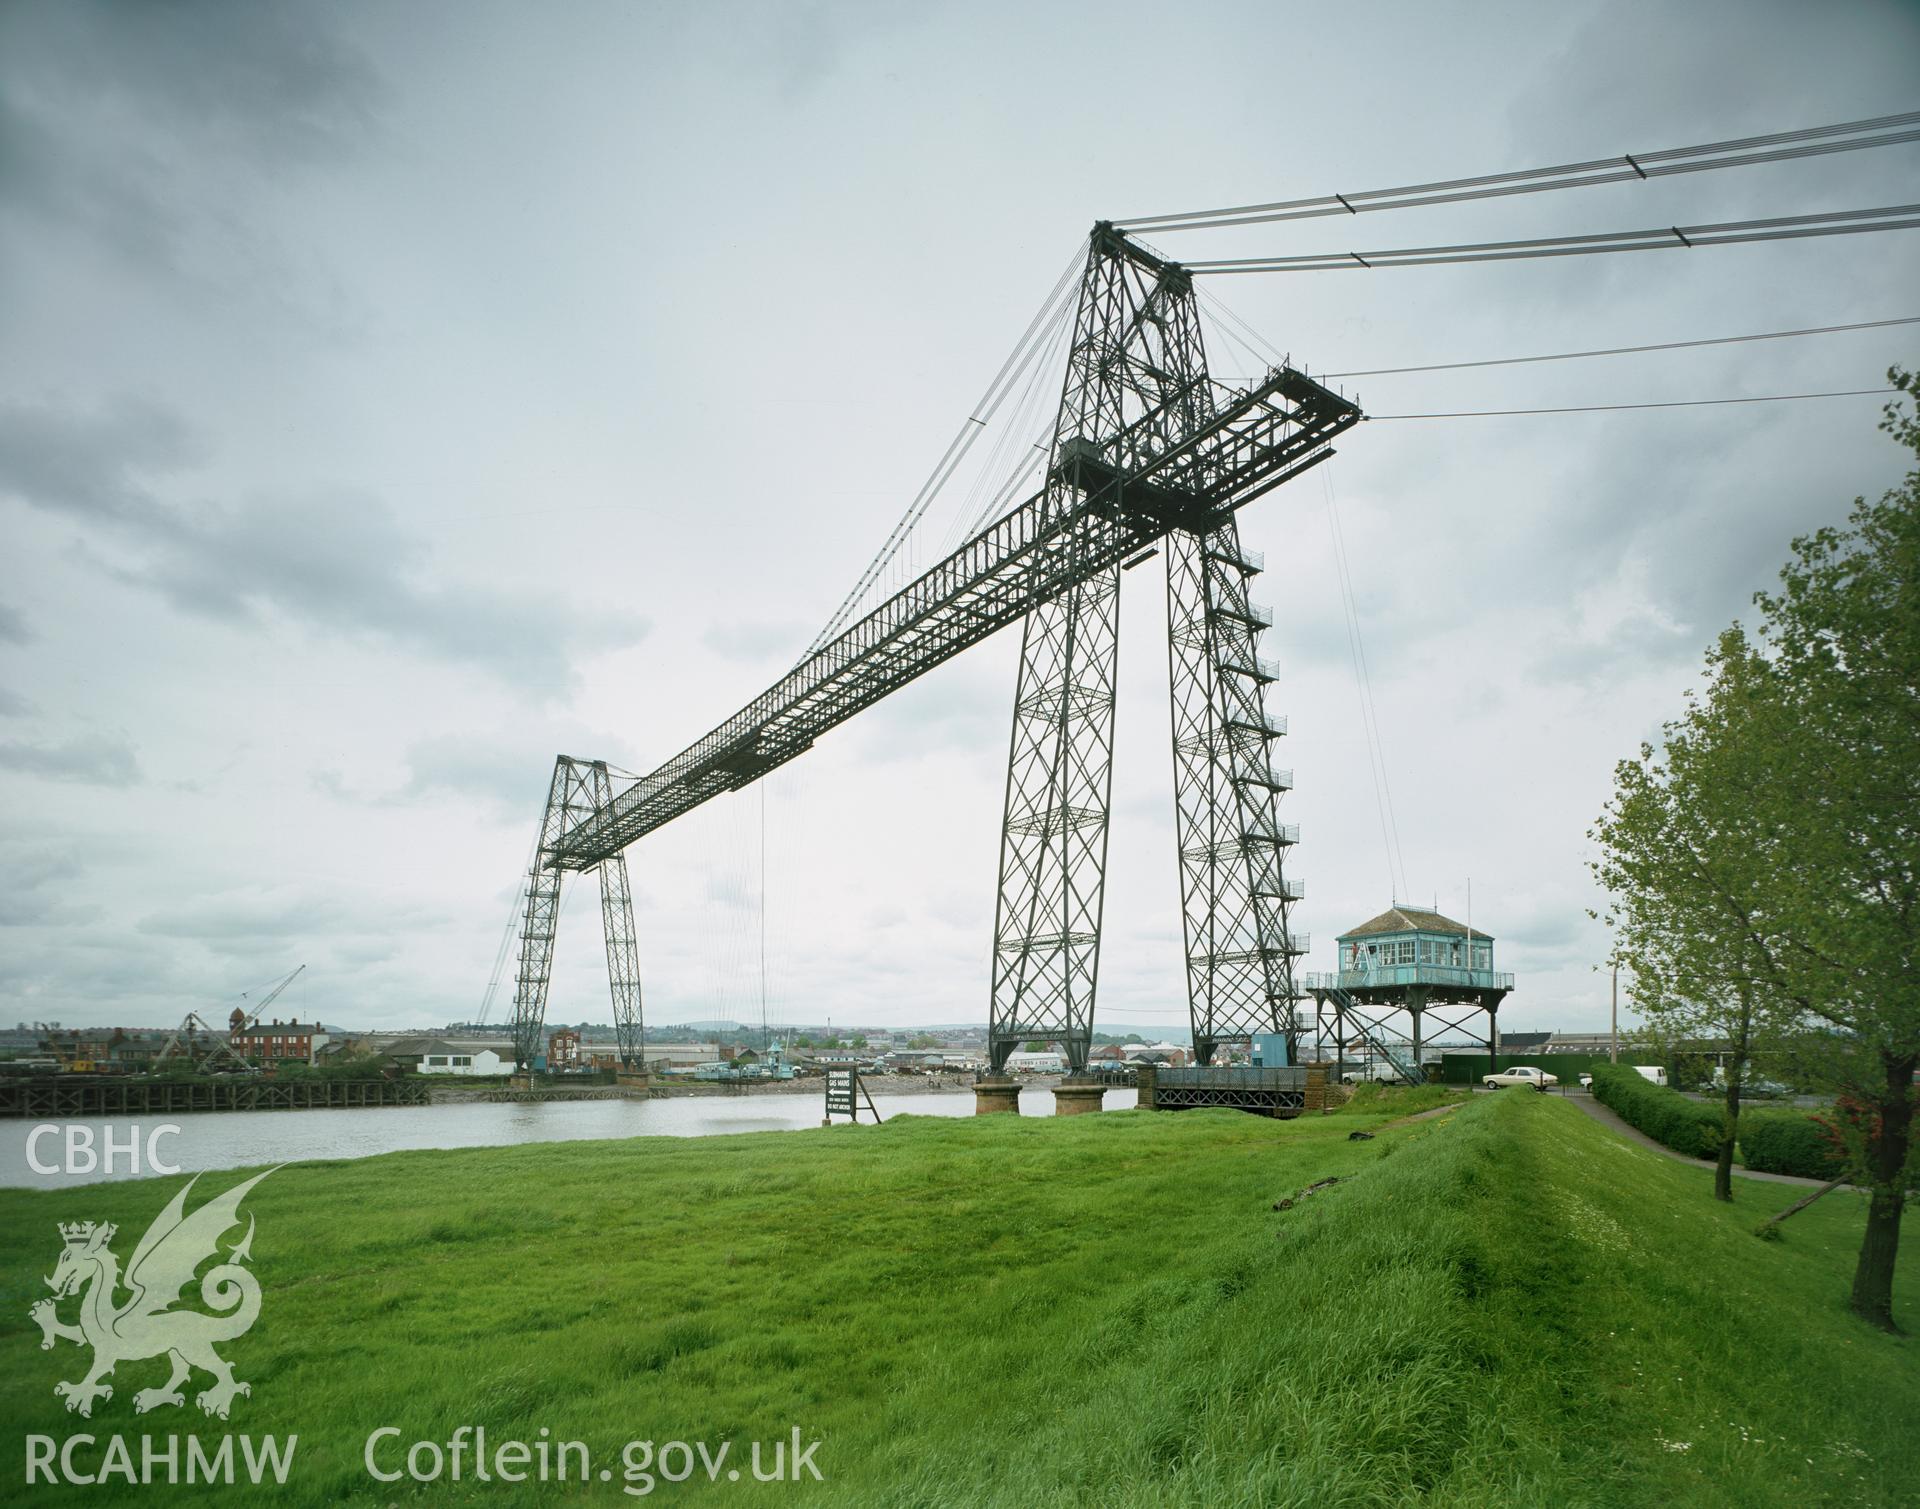 RCAHMW colour transparency showing view of Newport Transporter Bridge